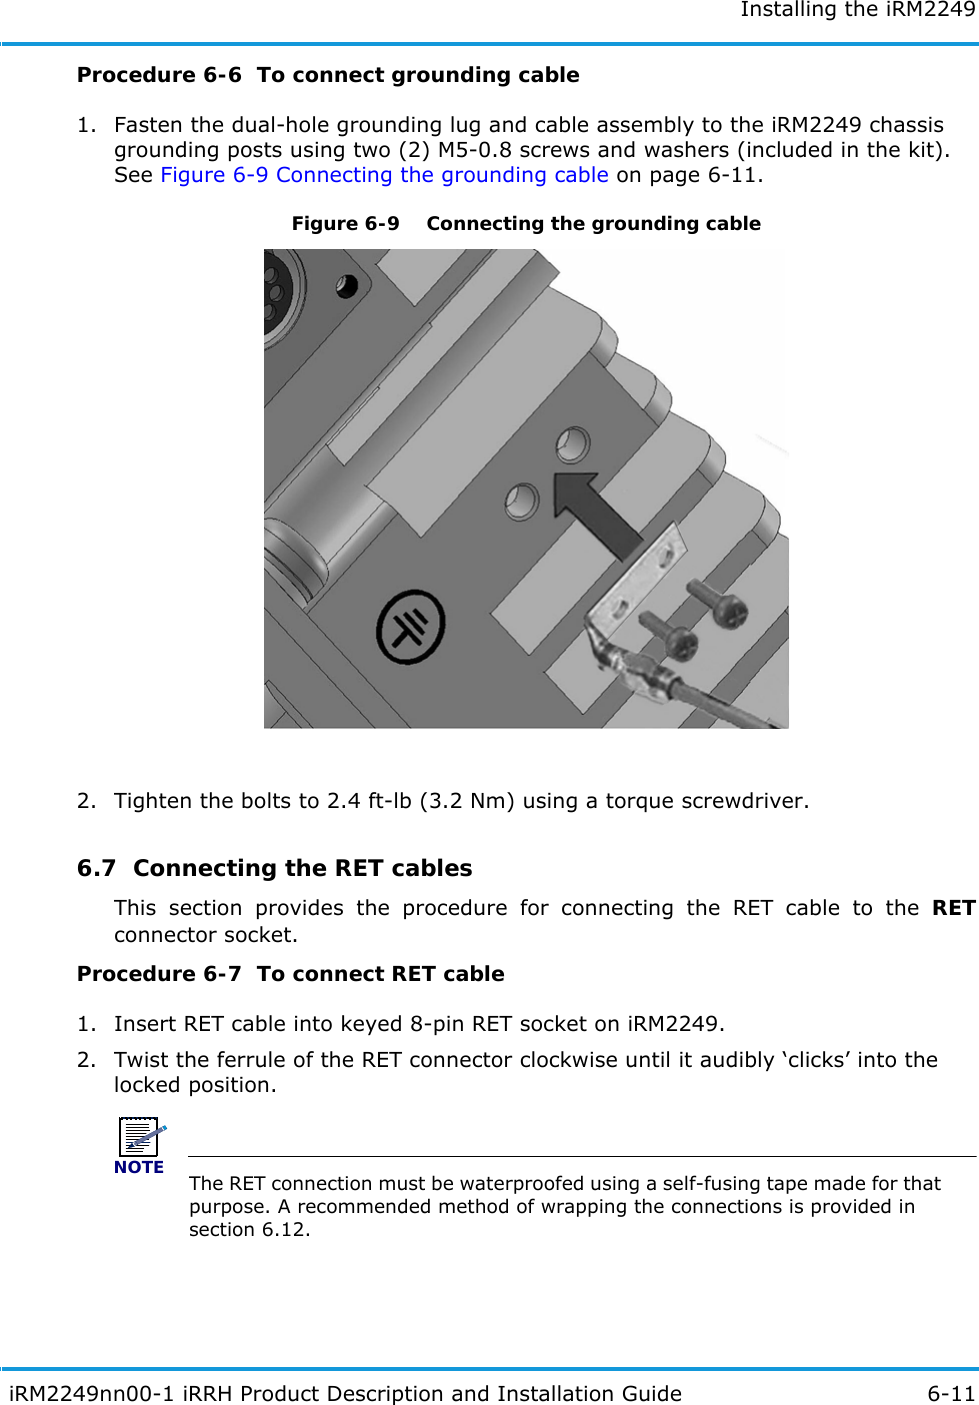 Installing the iRM2249 iRM2249nn00-1 iRRH Product Description and Installation Guide 6-11Procedure 6-6  To connect grounding cable1. Fasten the dual-hole grounding lug and cable assembly to the iRM2249 chassis grounding posts using two (2) M5-0.8 screws and washers (included in the kit). See Figure 6-9 Connecting the grounding cable on page 6-11.Figure 6-9   Connecting the grounding cable2. Tighten the bolts to 2.4 ft-lb (3.2 Nm) using a torque screwdriver.6.7  Connecting the RET cablesThis section provides the procedure for connecting the RET cable to the RETconnector socket.Procedure 6-7  To connect RET cable1. Insert RET cable into keyed 8-pin RET socket on iRM2249.2. Twist the ferrule of the RET connector clockwise until it audibly ‘clicks’ into the locked position.NOTEThe RET connection must be waterproofed using a self-fusing tape made for that purpose. A recommended method of wrapping the connections is provided in section 6.12.